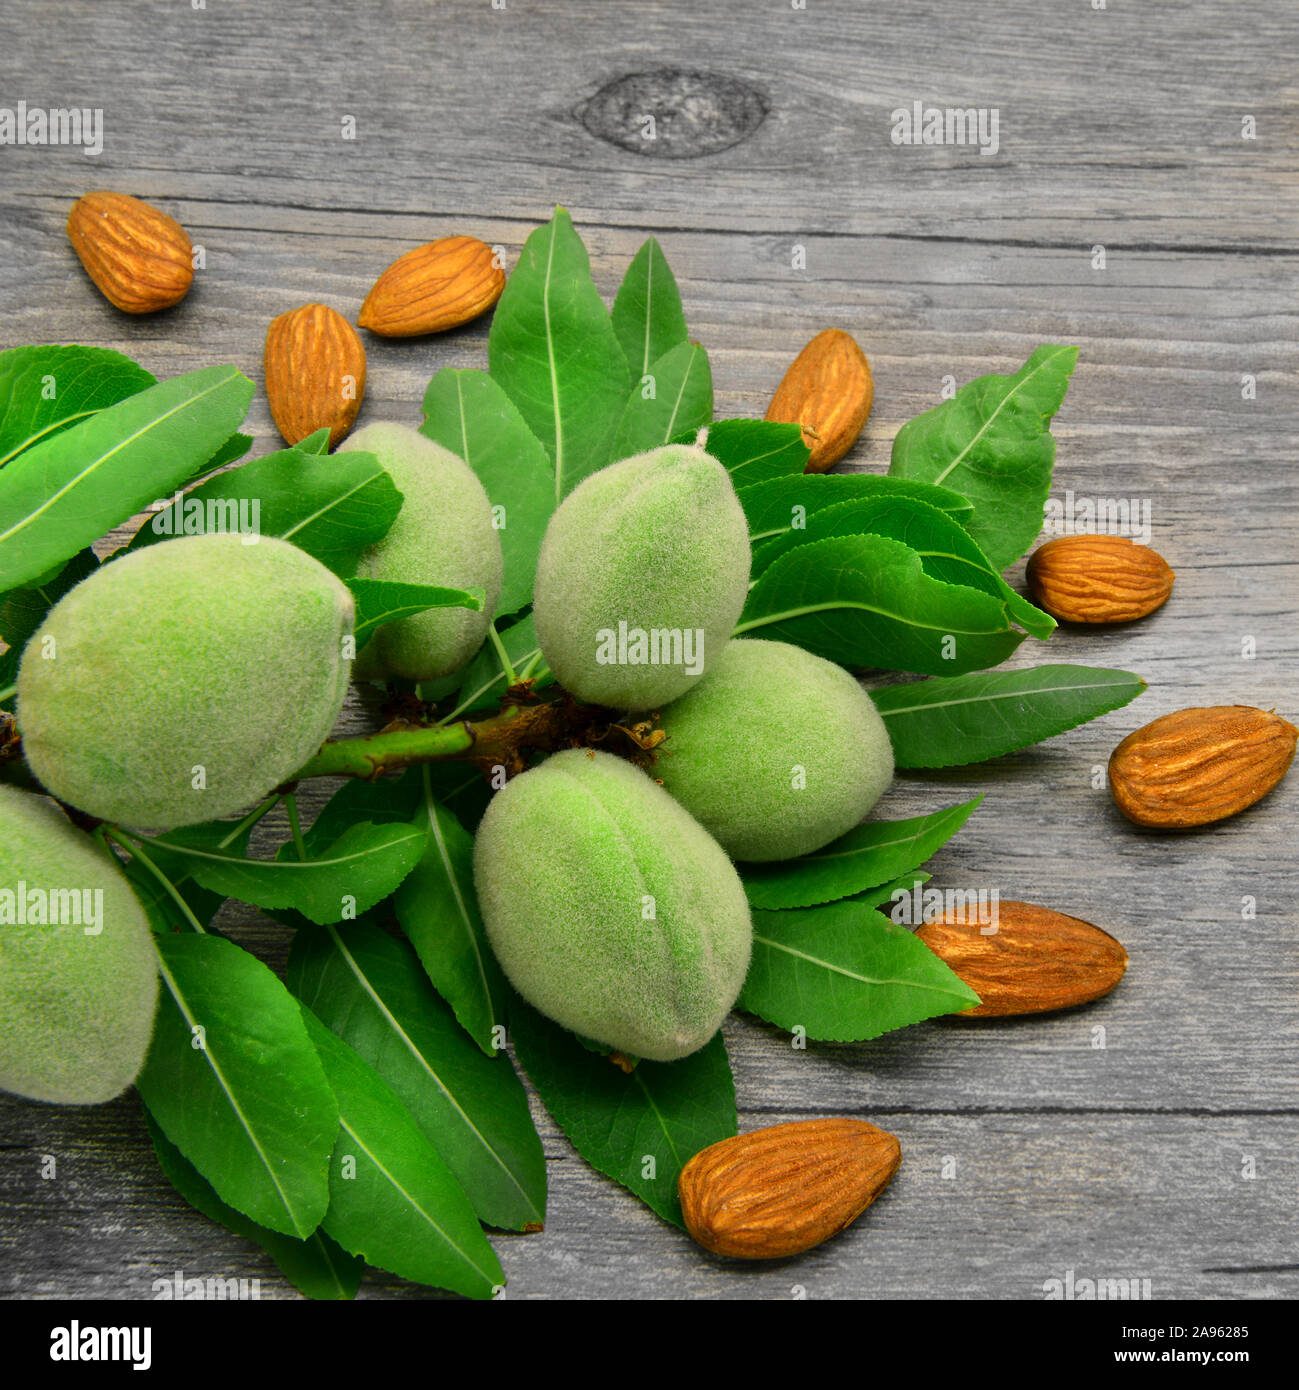 Fresh almond branch with almond kernels. Stock Photo